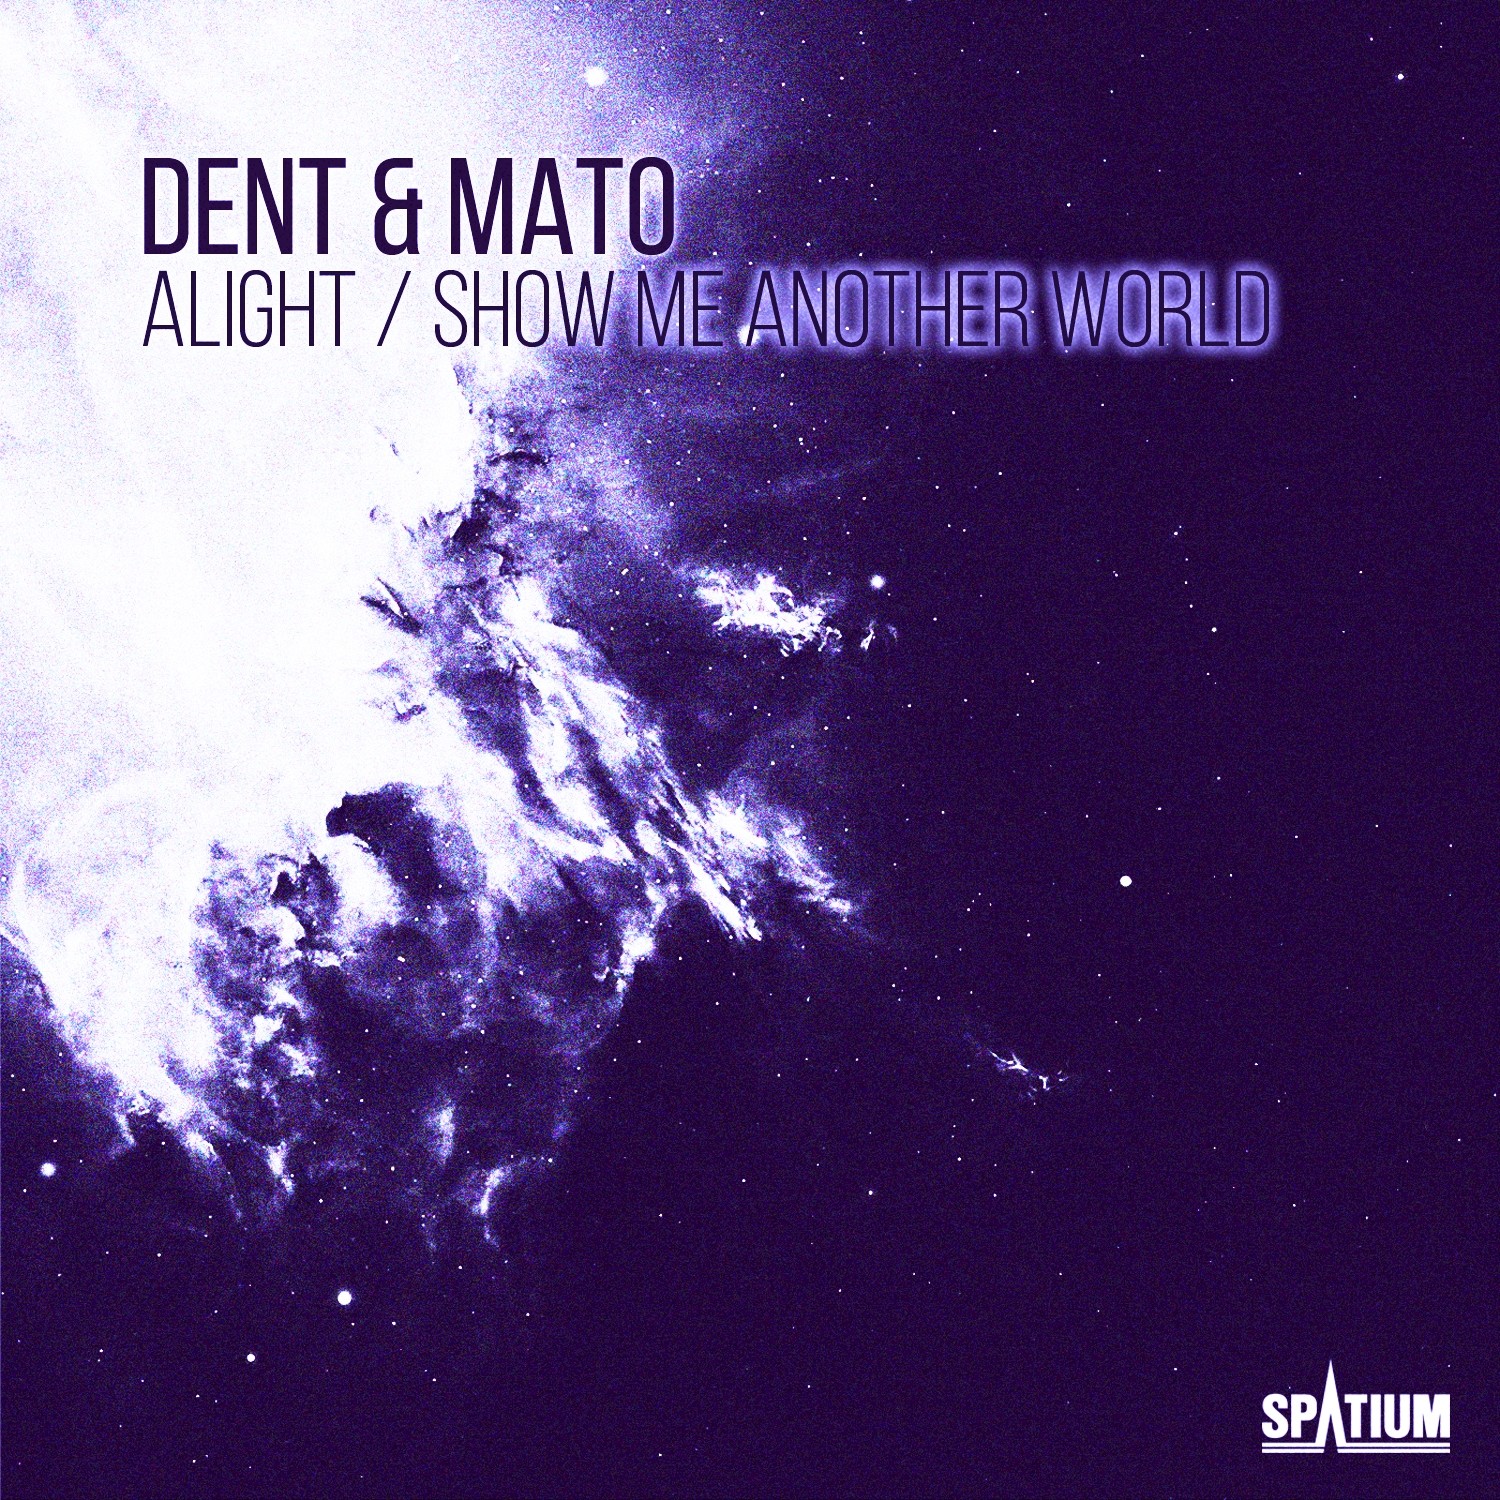 Alight / Show Me Another World